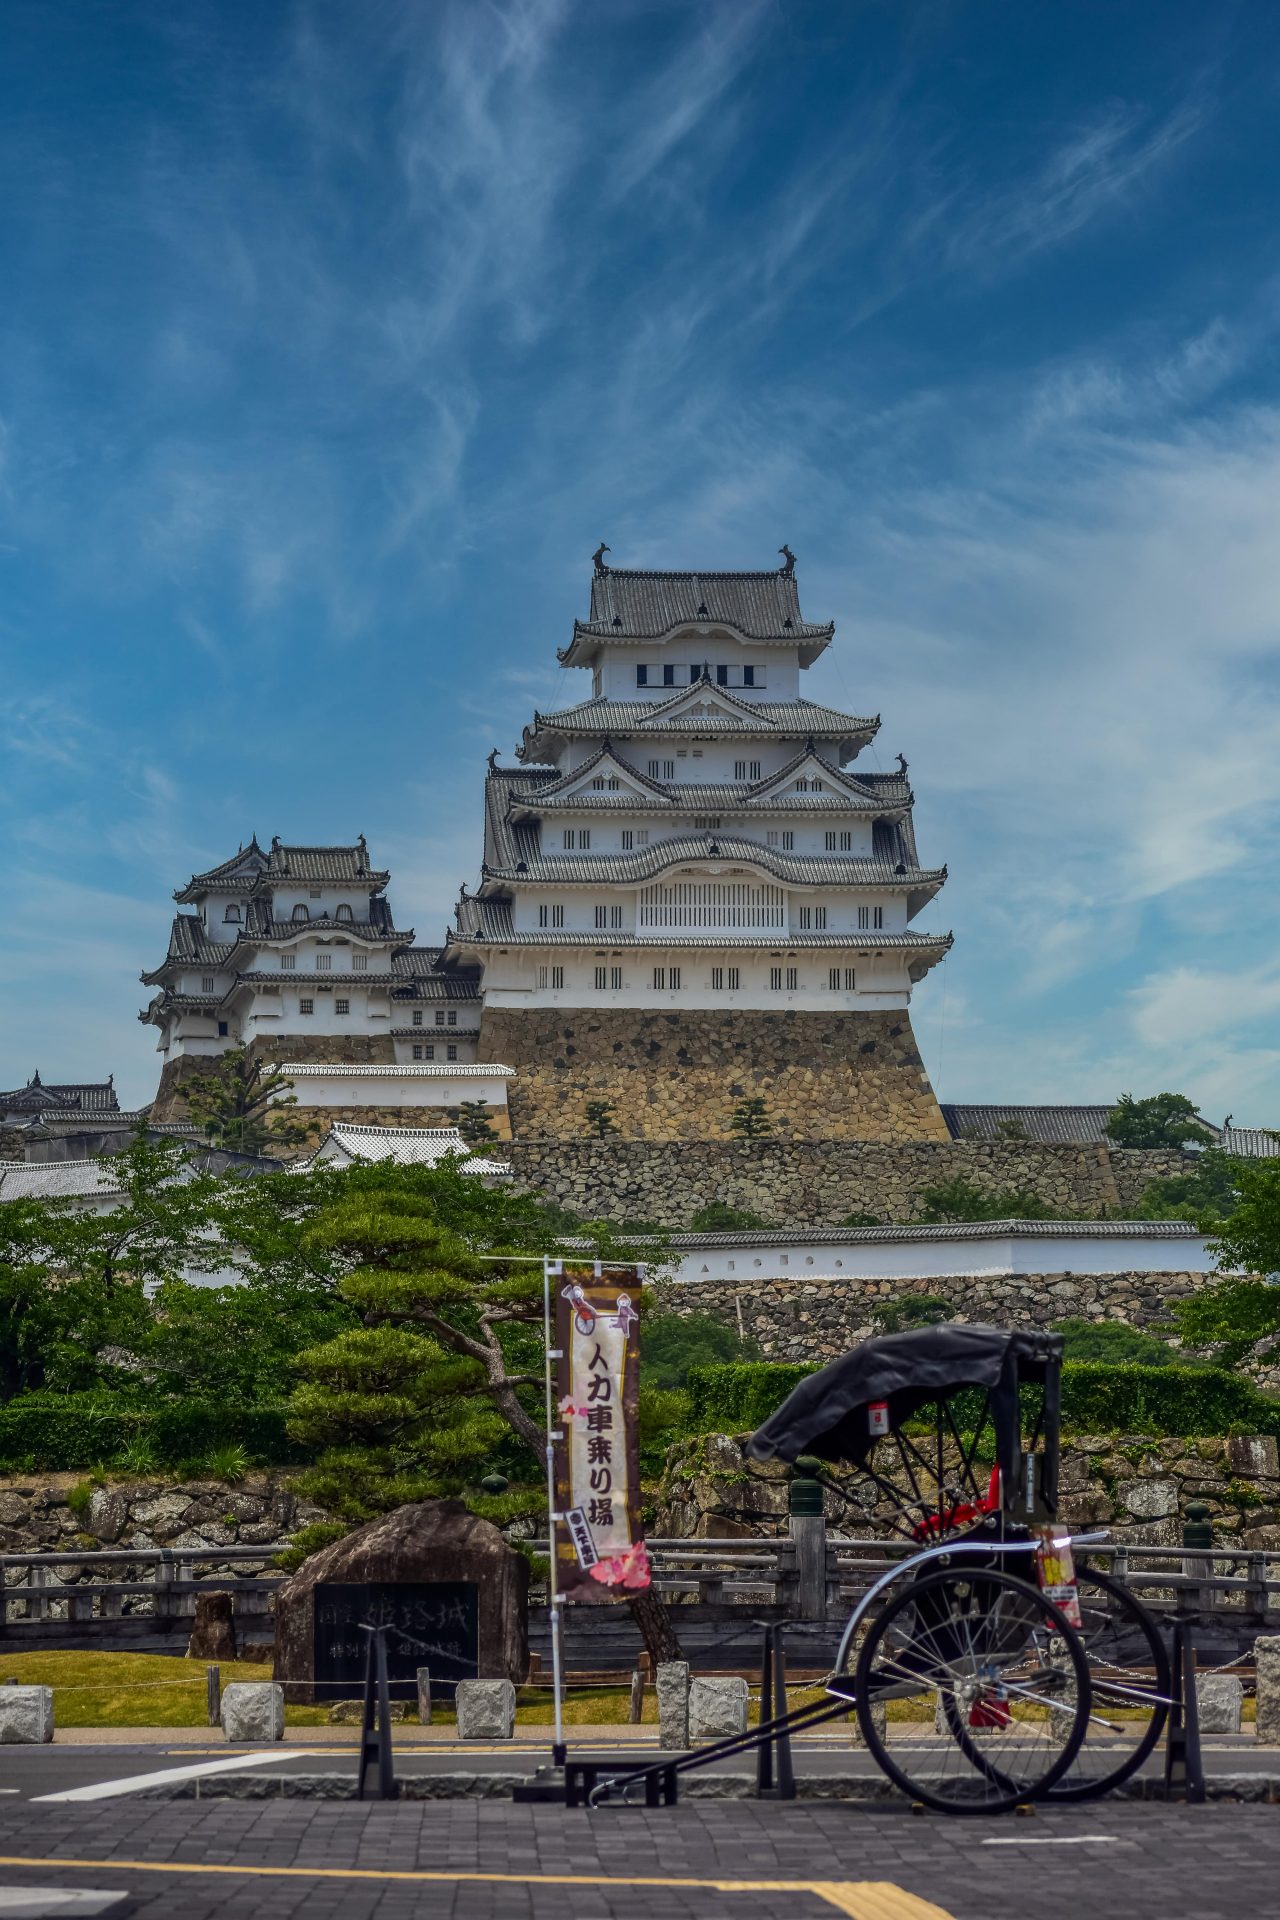 Himeji castle with a riksha in the foreground